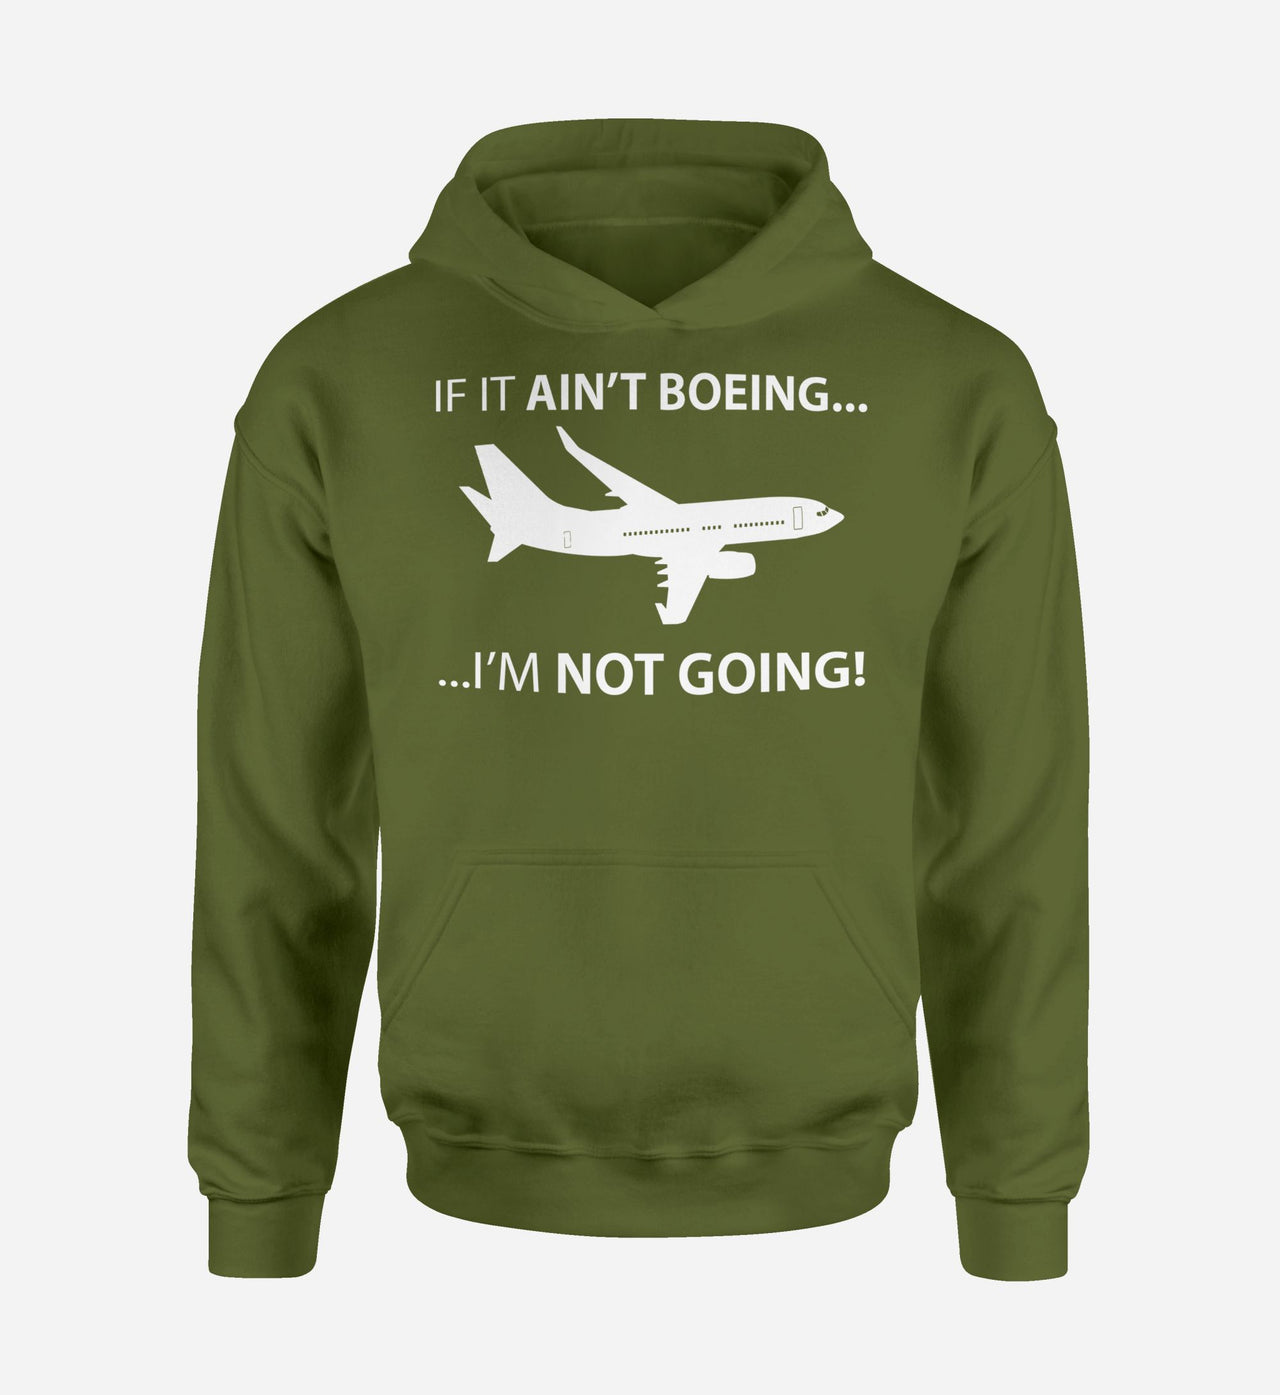 If It Ain't Boeing I'm Not Going! Designed Hoodies